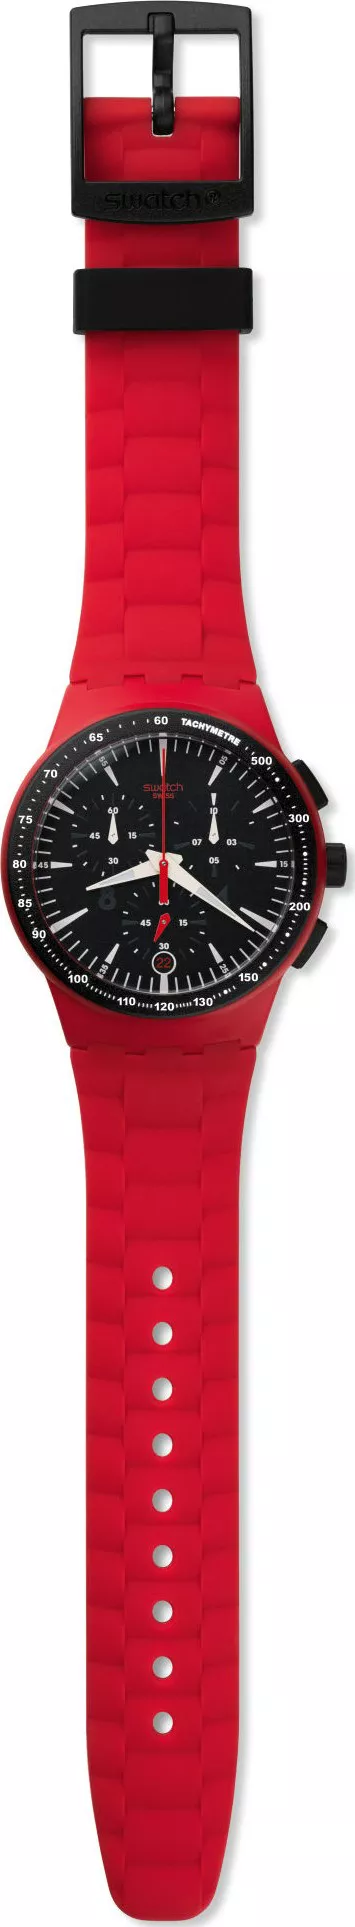  Swatch Fire Core Silicone Unisex Watch NEW, 41mm